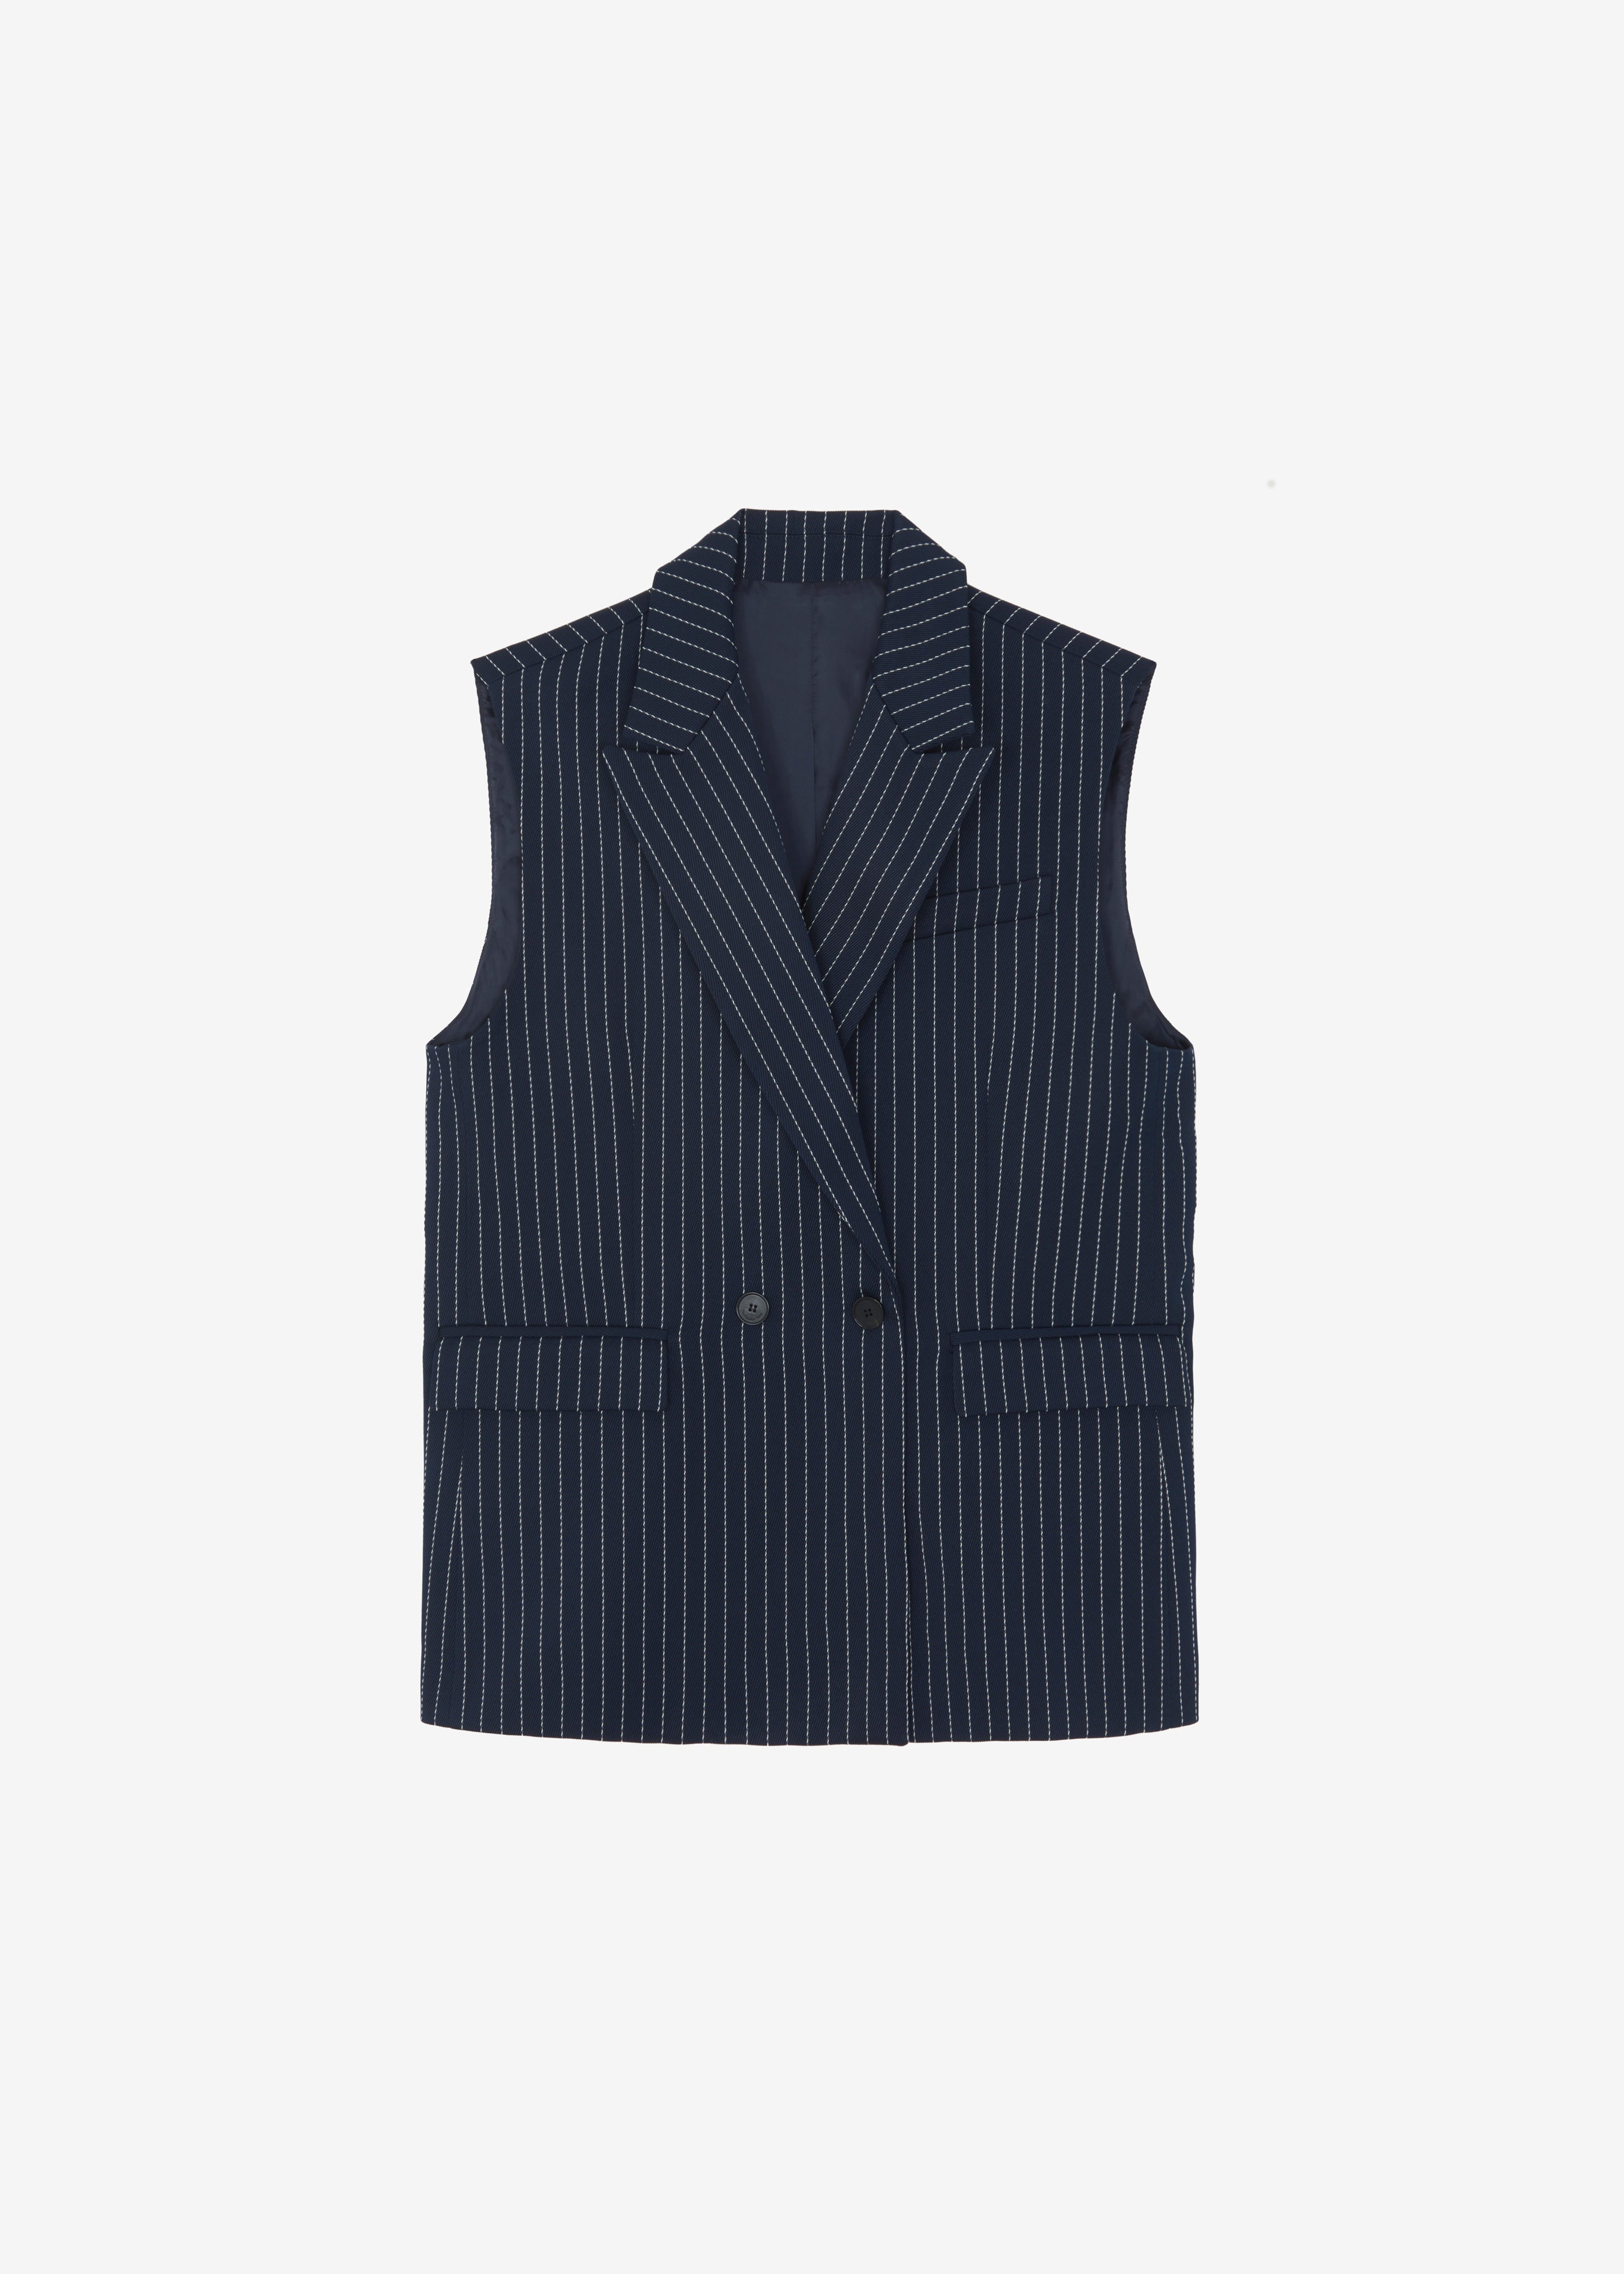 Shane Twill Double Breasted Vest - Navy/White Pinstripe - 7